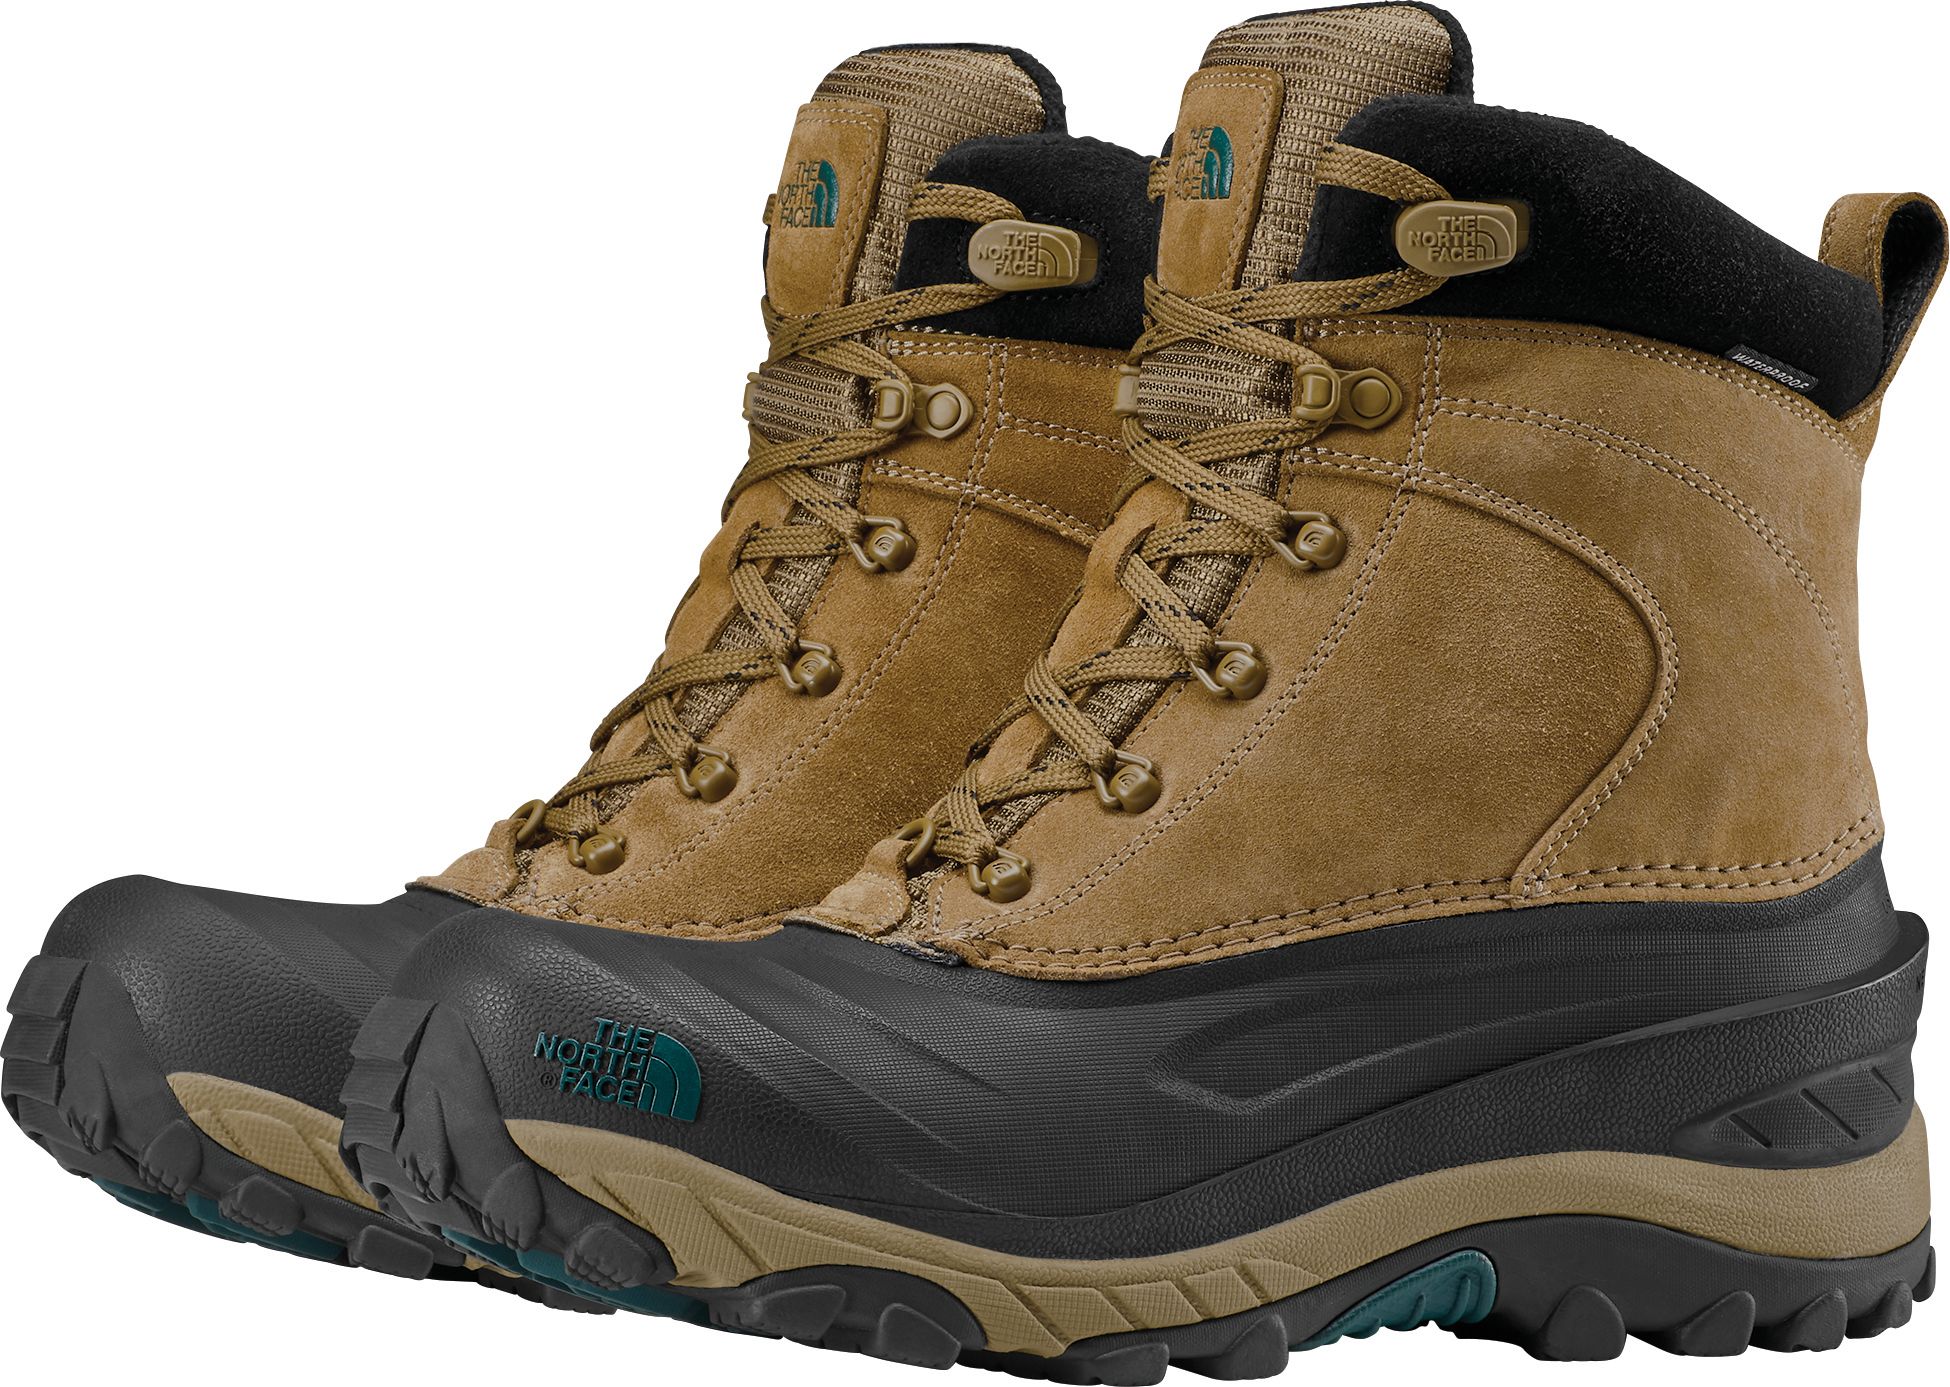 The North Face Men's Chilkat III 200g 